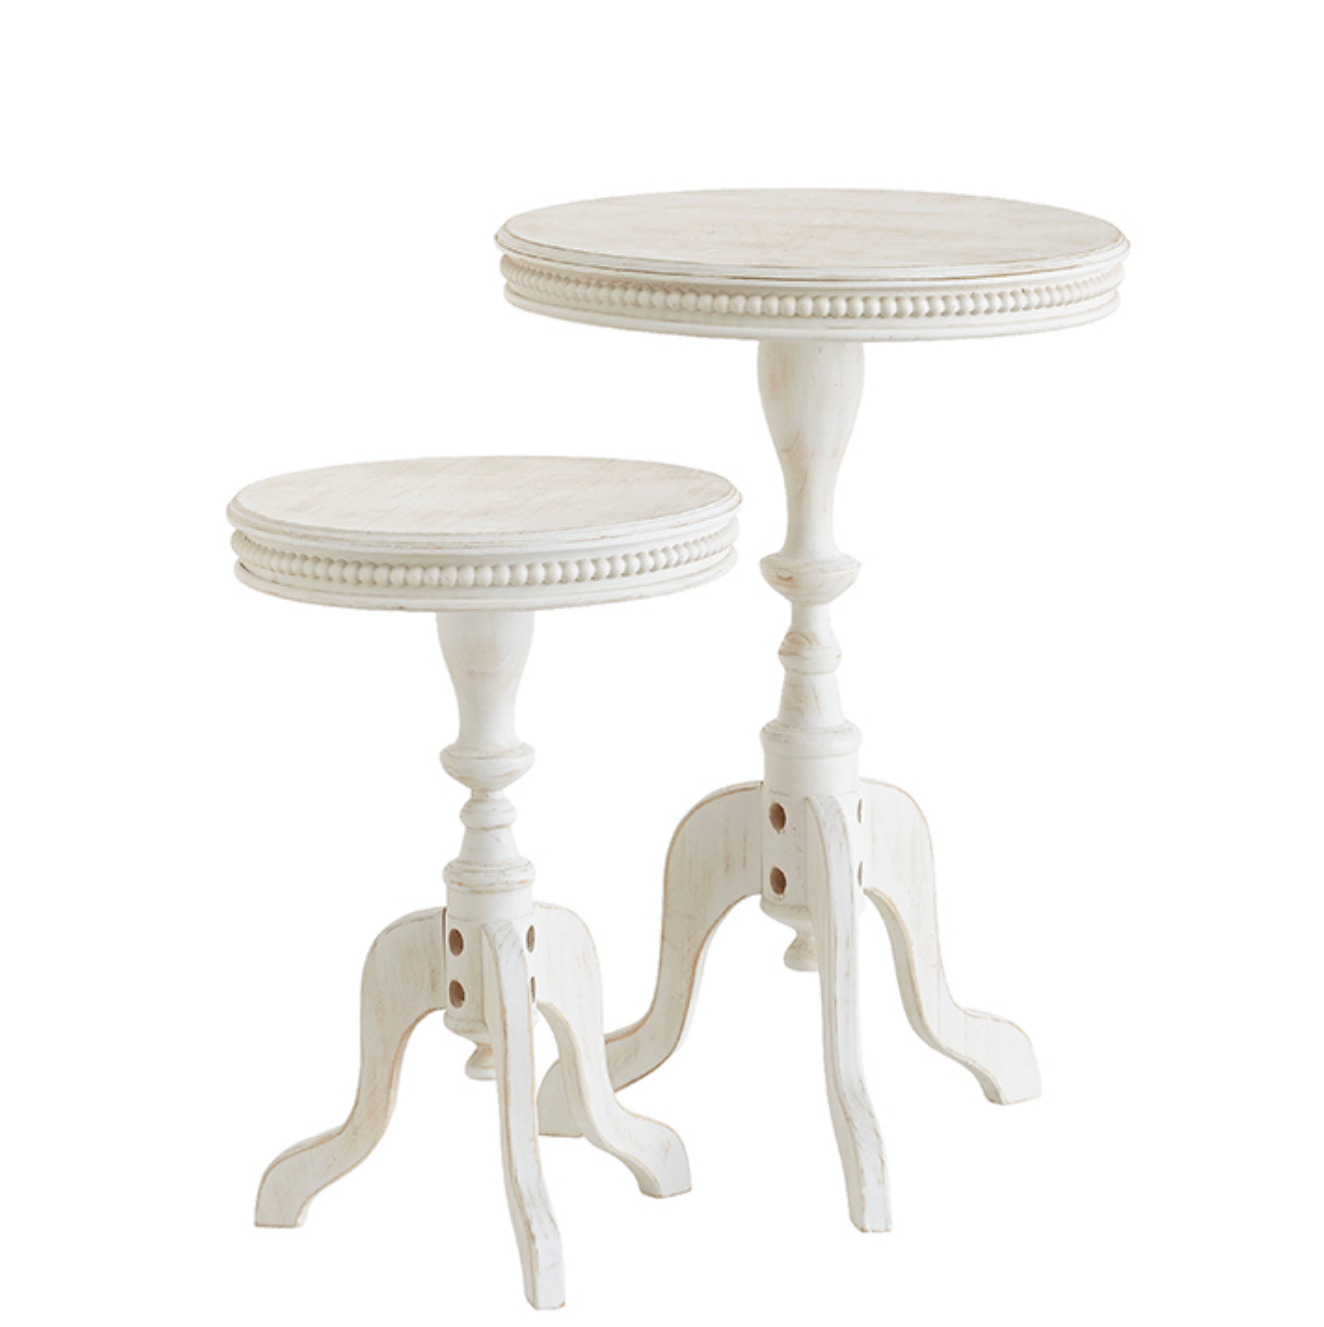 Distressed White Beaded Edge Side Table - Ruffled Feather